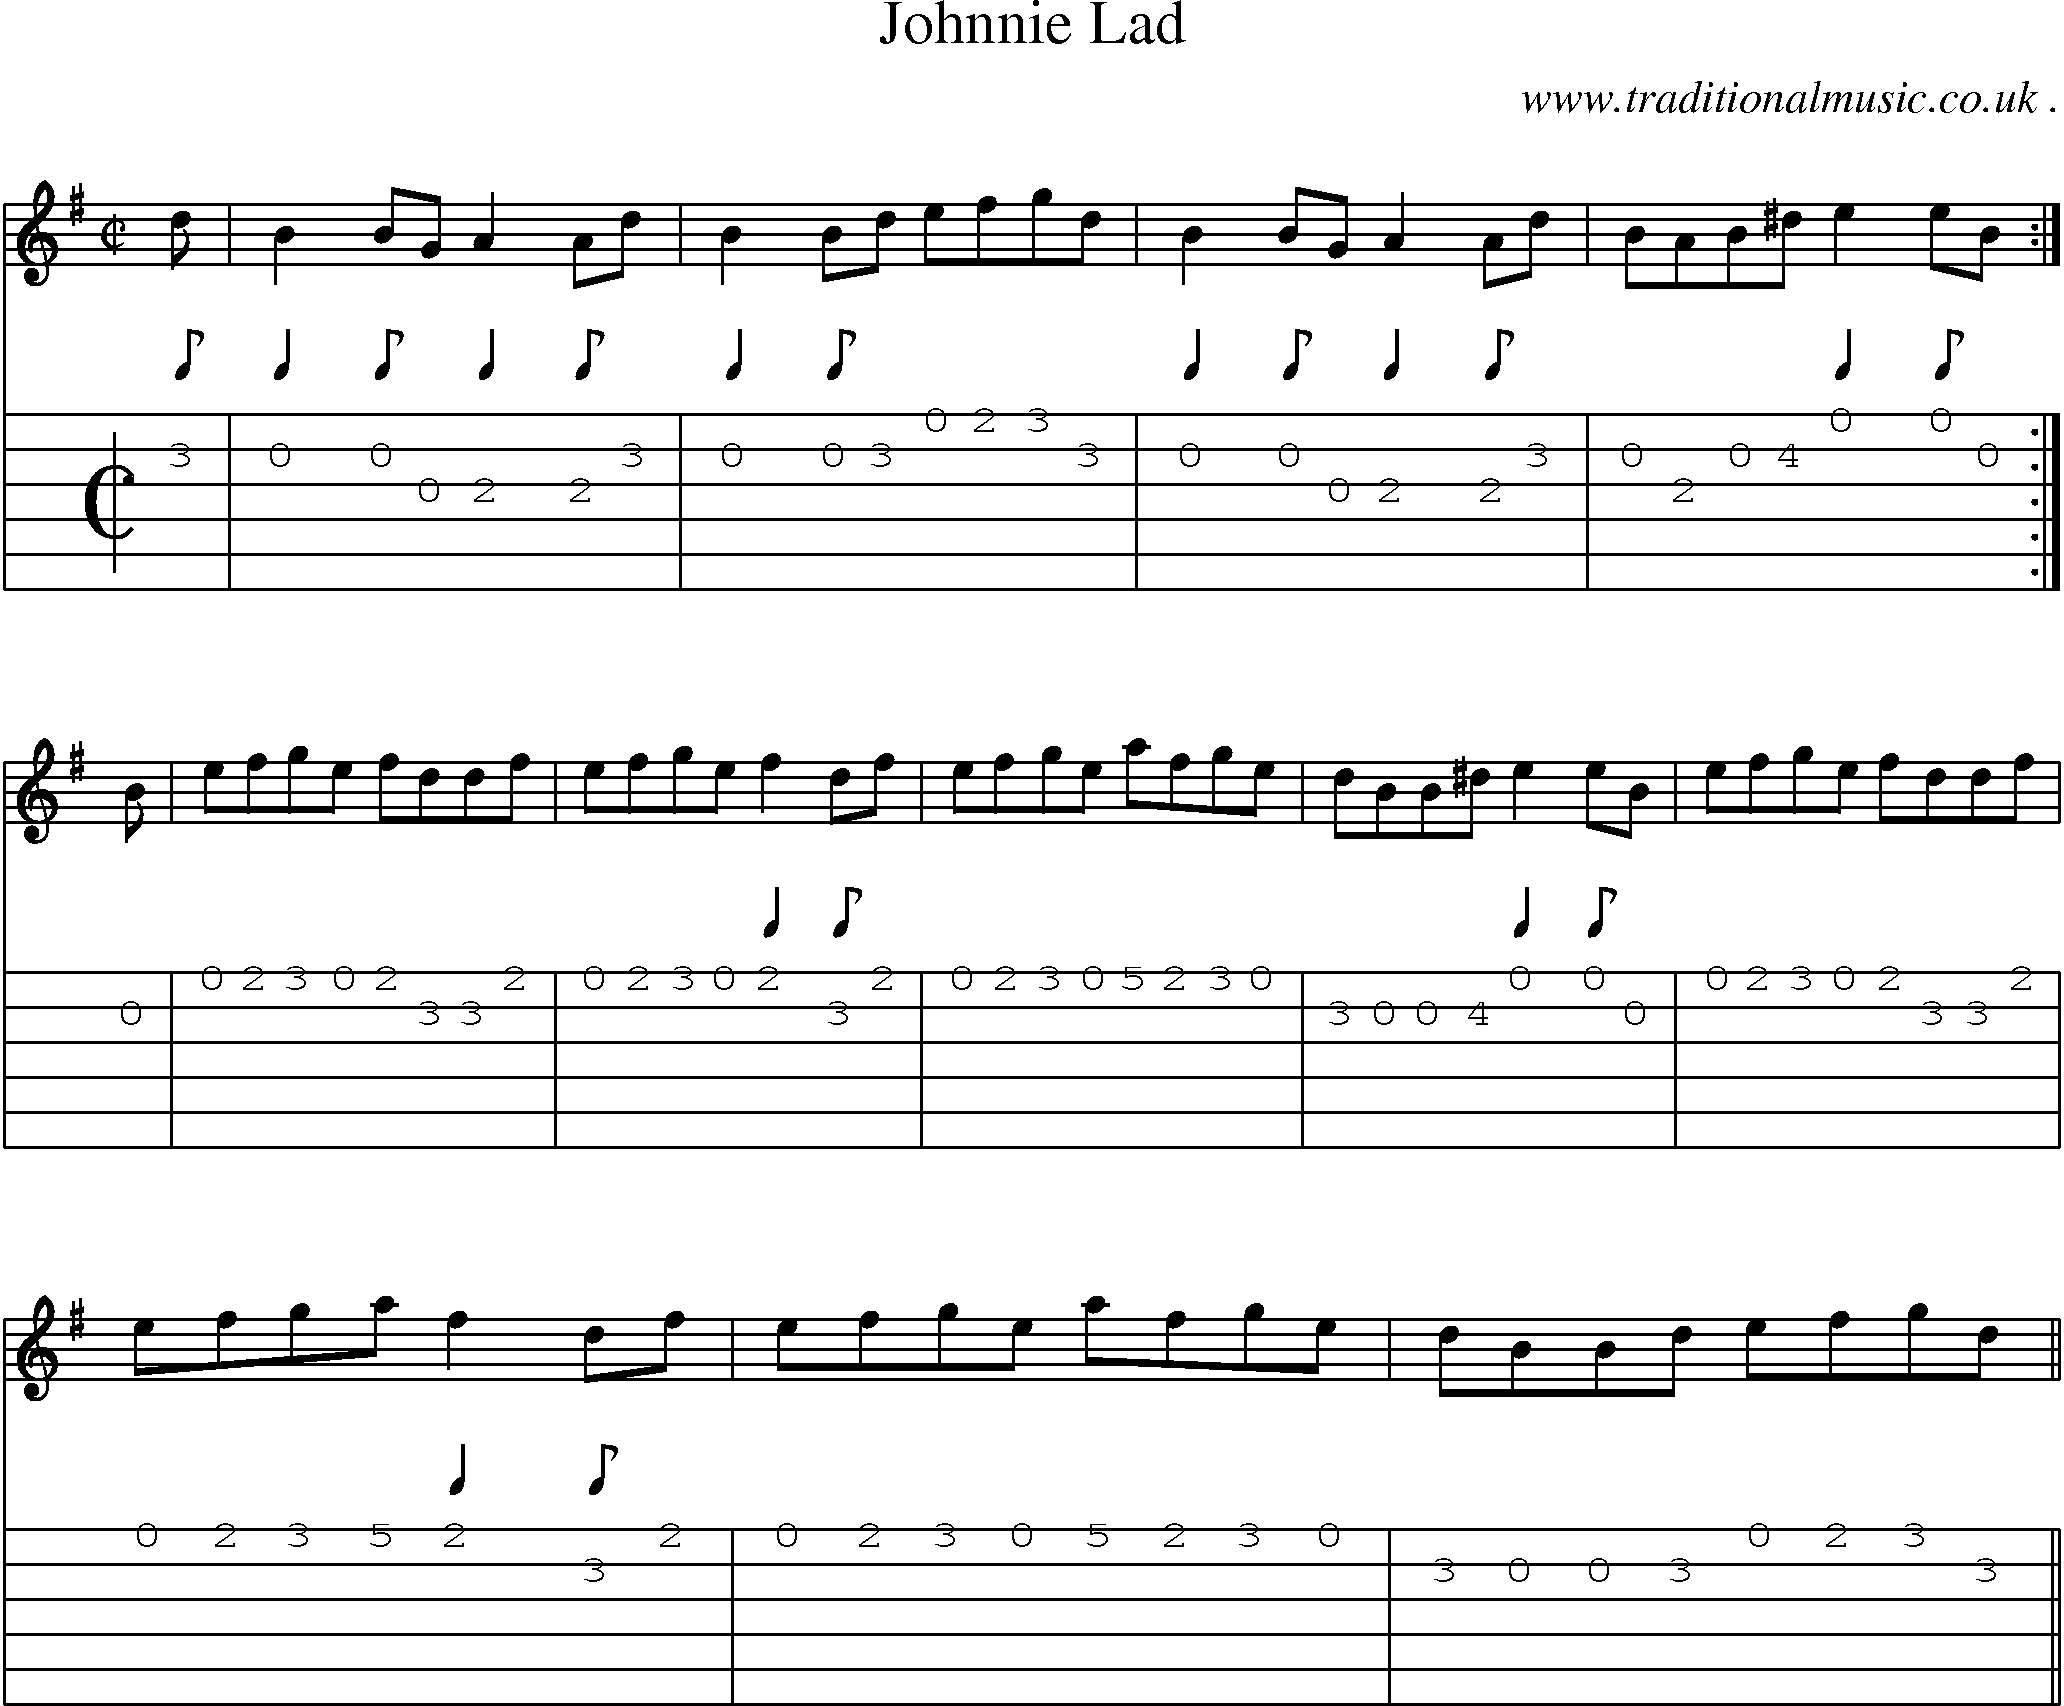 Sheet-music  score, Chords and Guitar Tabs for Johnnie Lad